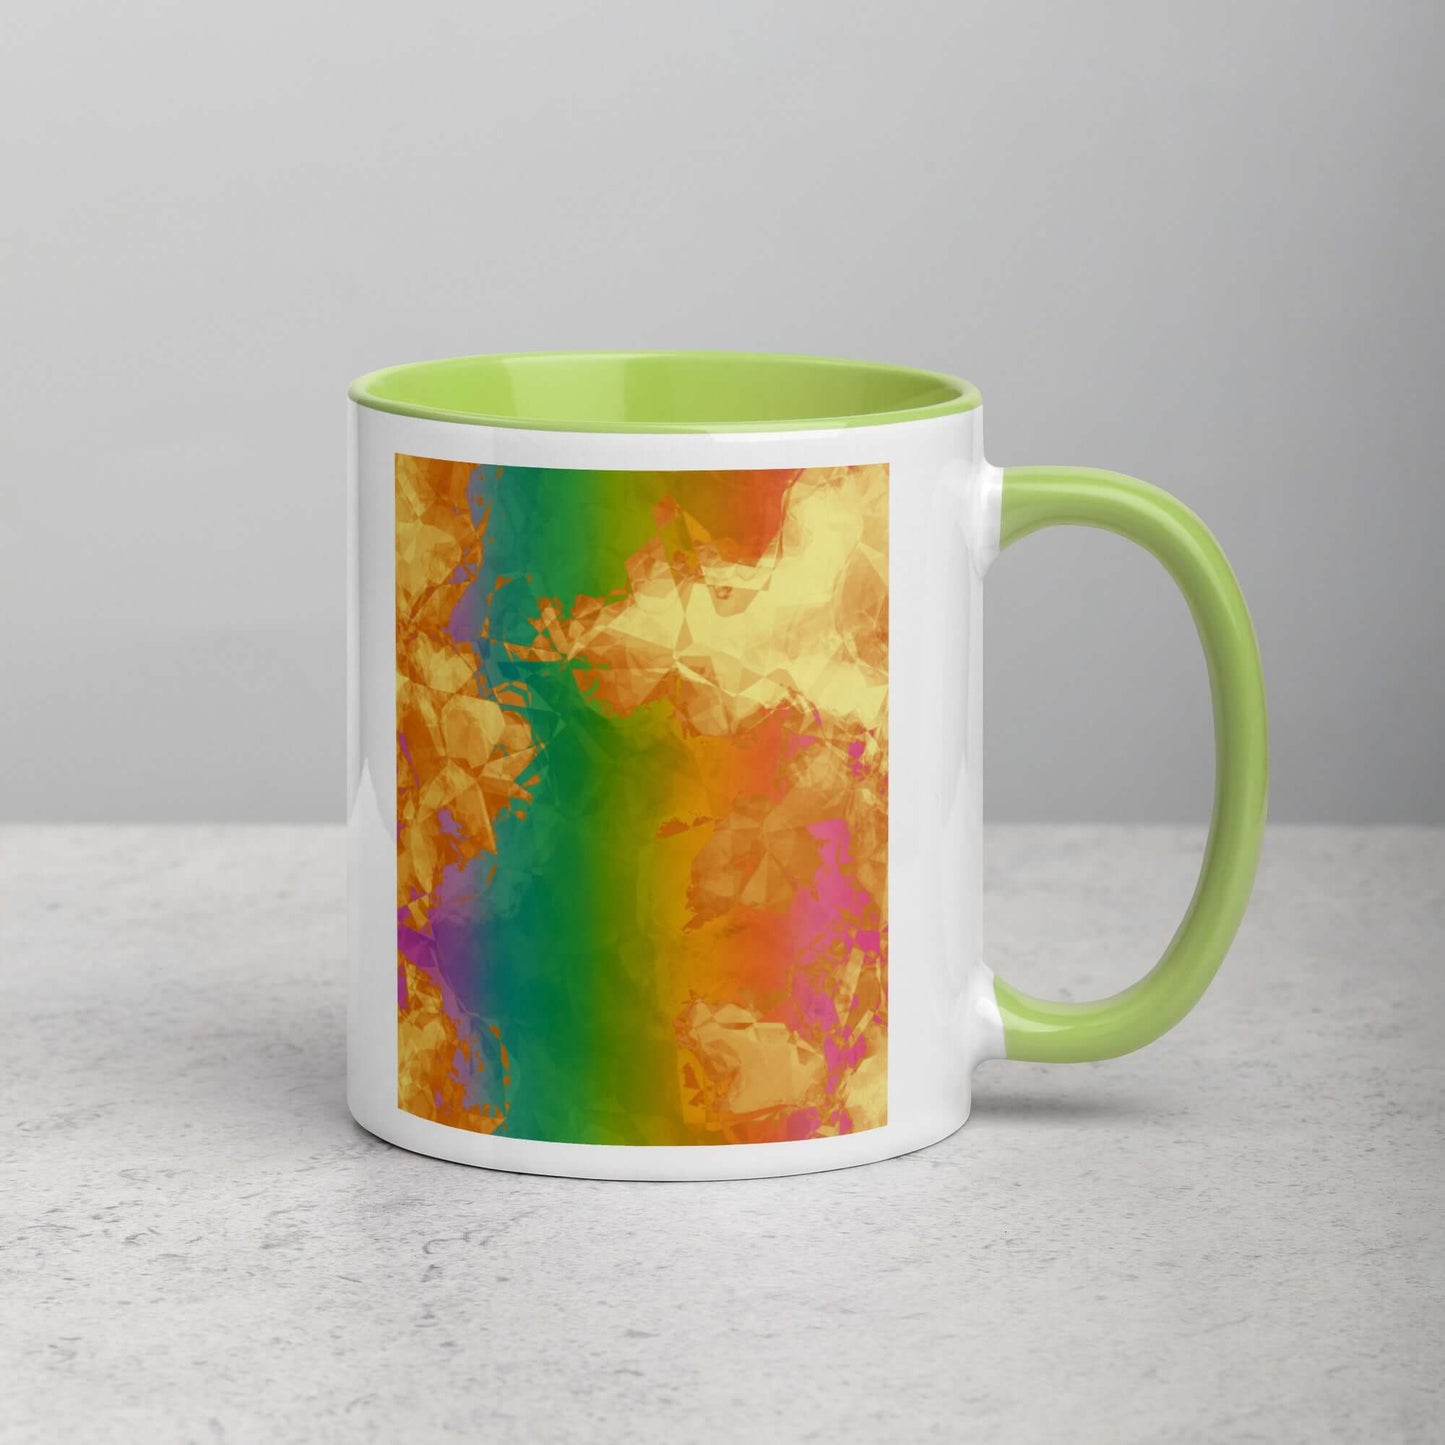 Fiery Rainbow “Rainbow Geode” Abstract Art Mug with Lime Green Color Inside Right Handed Front View